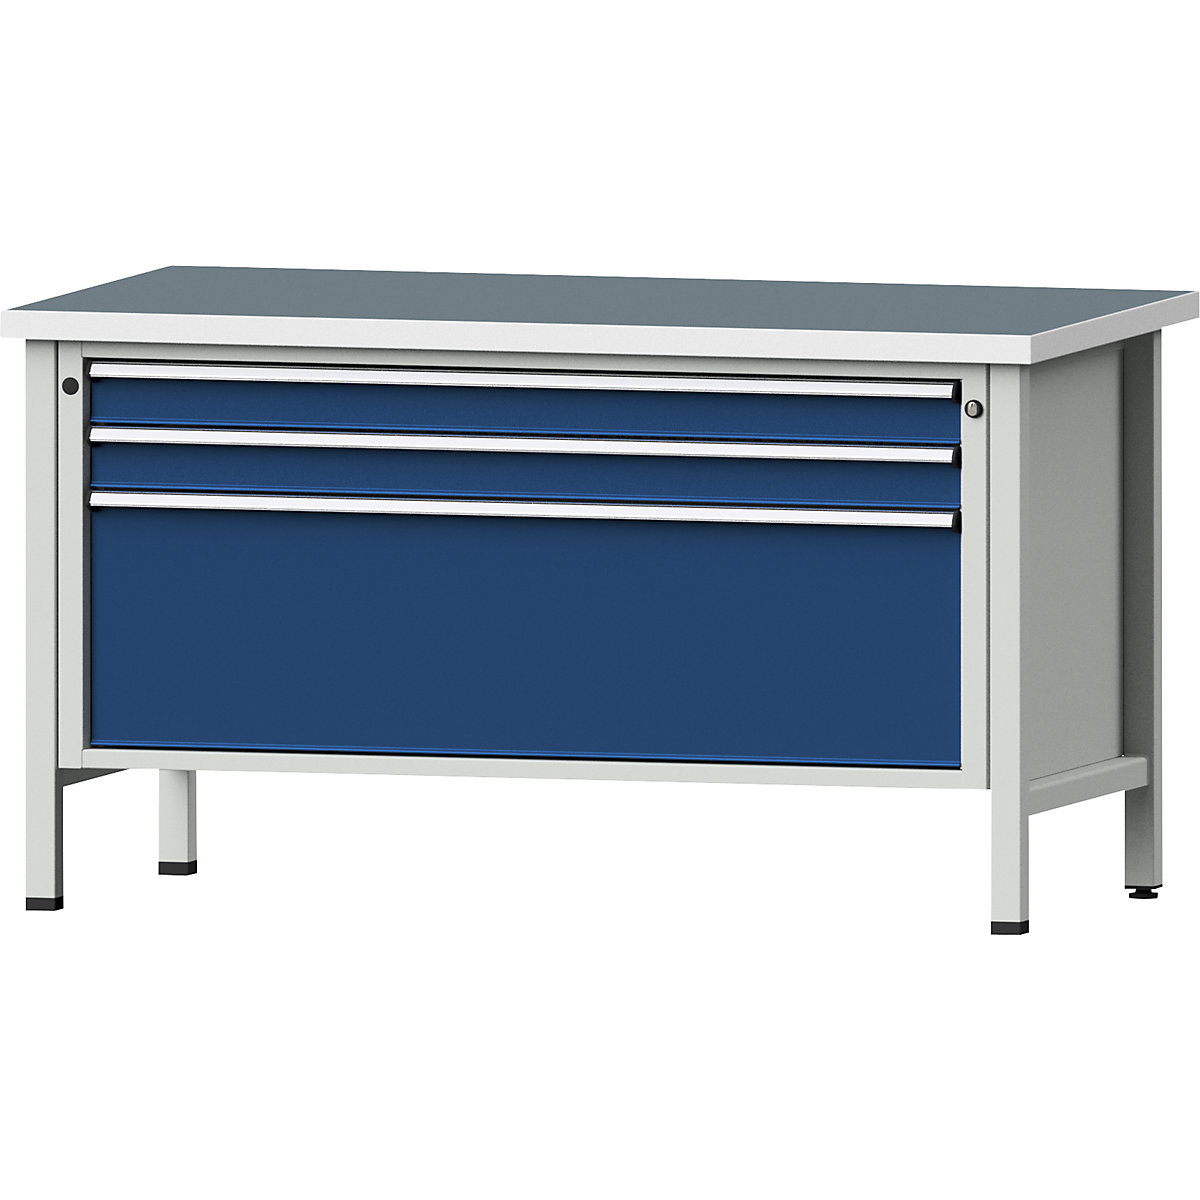 Workbench with XL/XXL drawers, frame construction – ANKE, width 1500 mm, 3 drawers, universal worktop, front in gentian blue-9